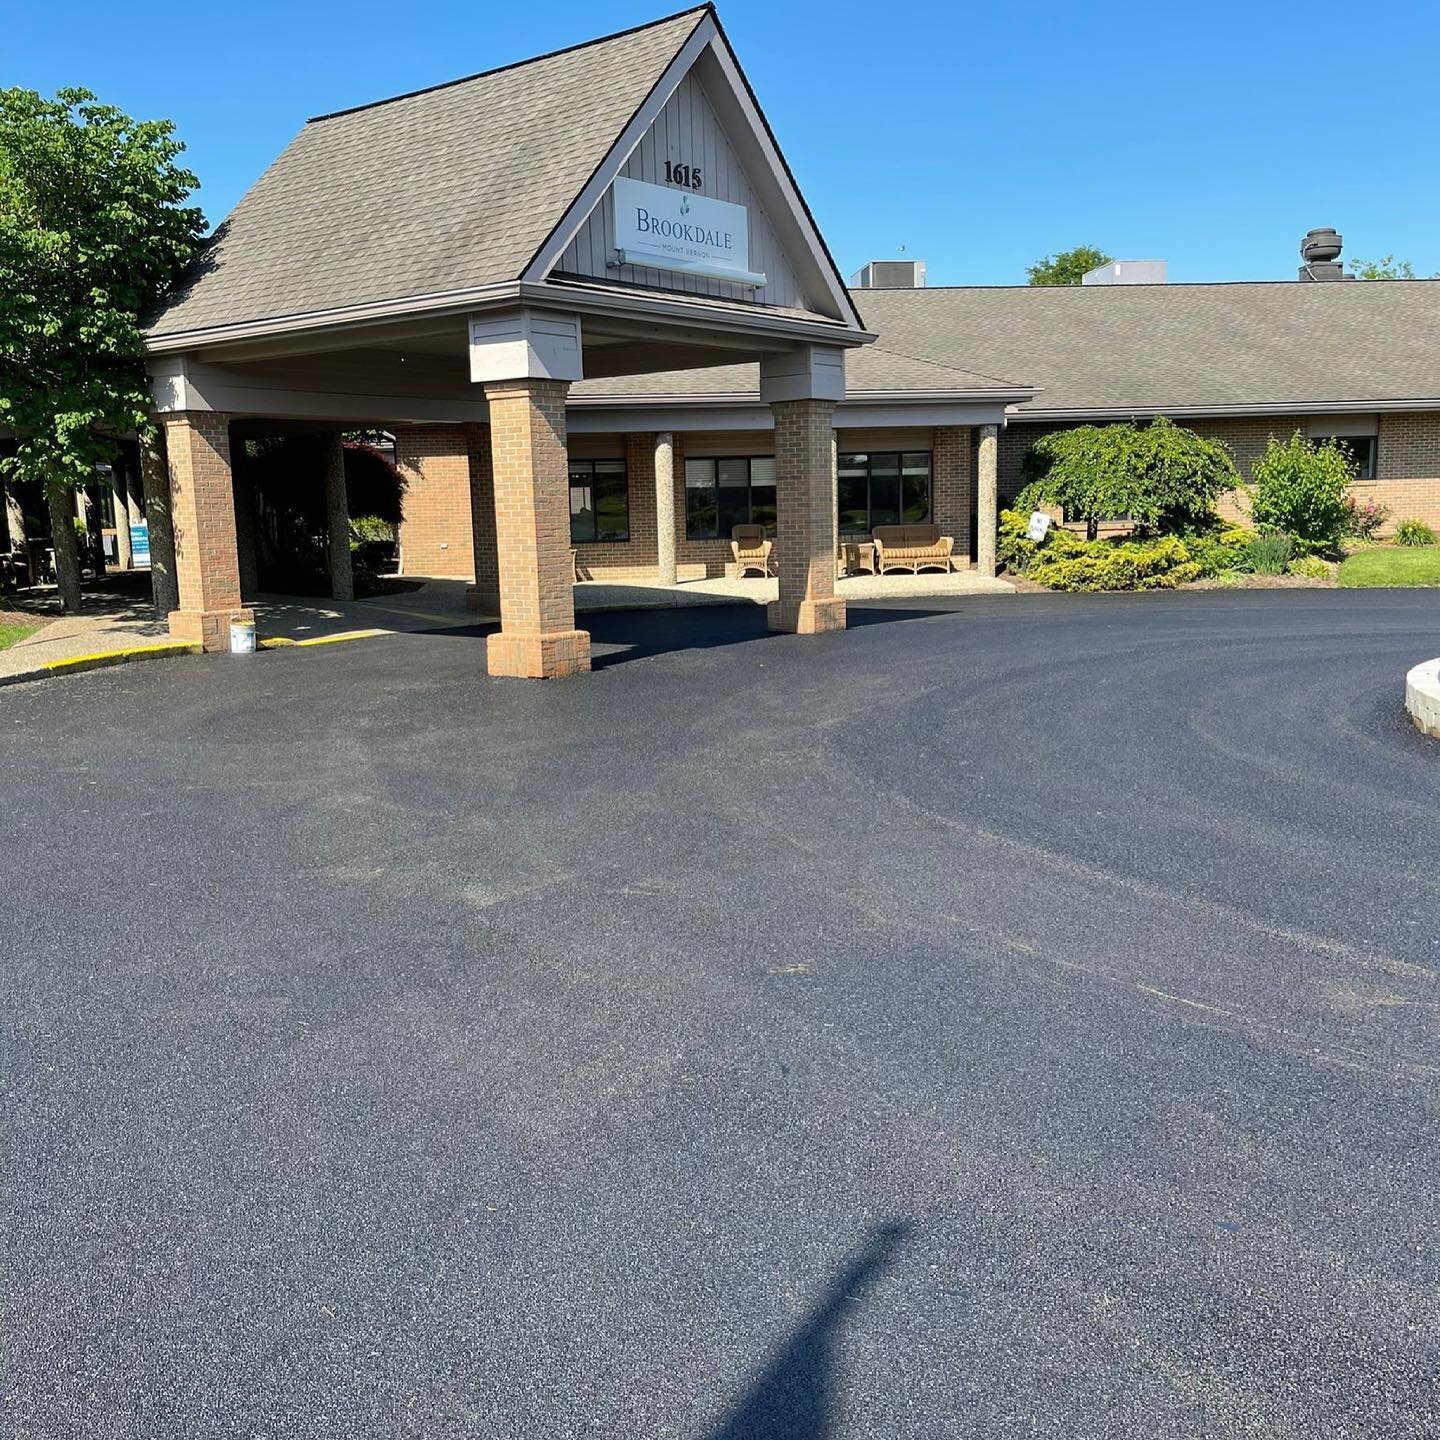 Full mill and pave job completed in Mt. Vernon, Ohio for Brookdale Senior Living!